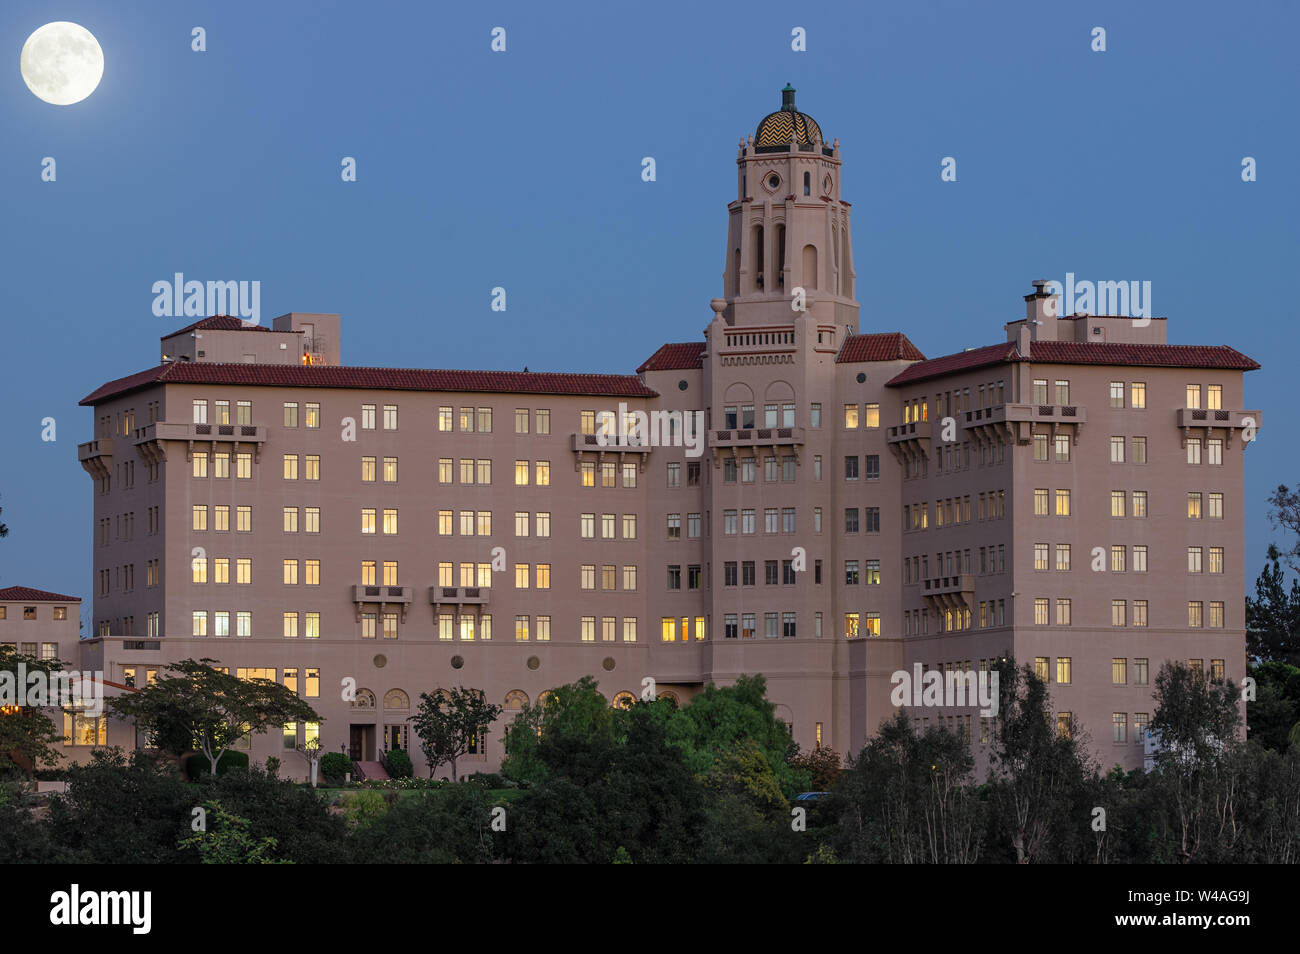 Richard H. Chambers Courthouse in Pasadena, California. One shot for the building and one for the moon merged. The position of the moon is correct. Stock Photo